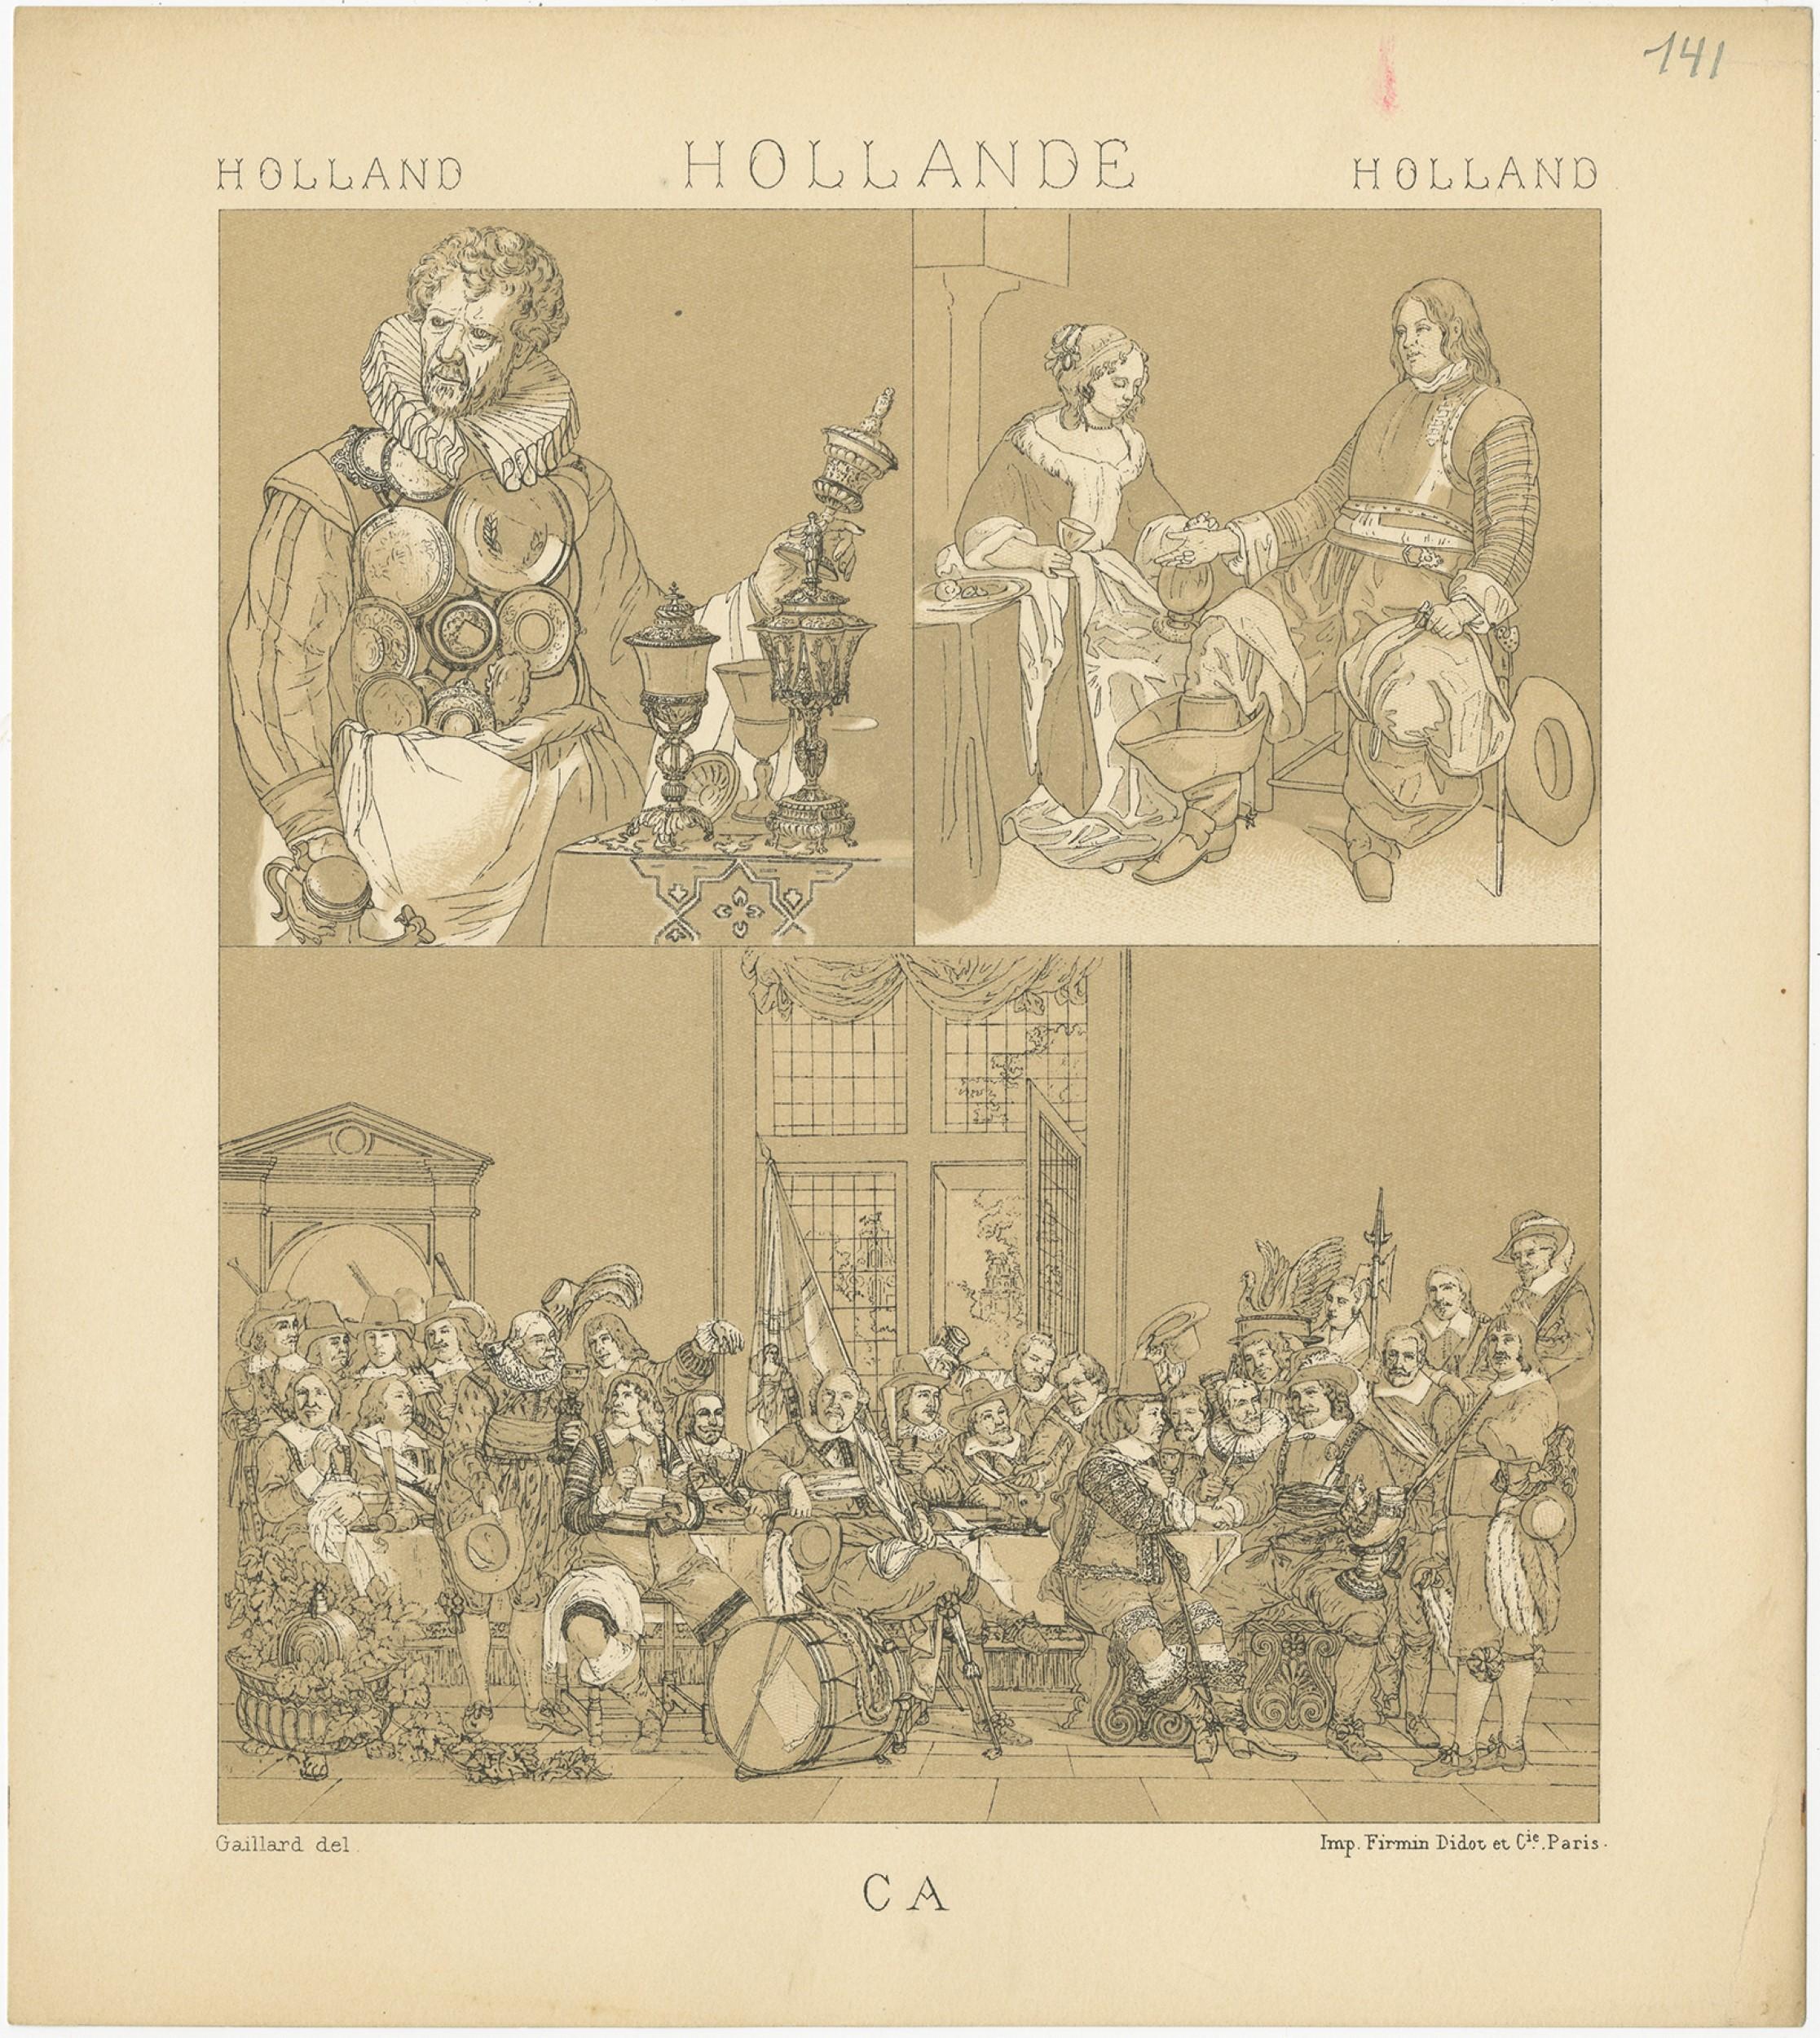 Antique print titled 'Holland - Hollande - Holland'. Chromolithograph of Holland Scenes. This print originates from 'Le Costume Historique' by M.A. Racinet. Published, circa 1880.
 
   